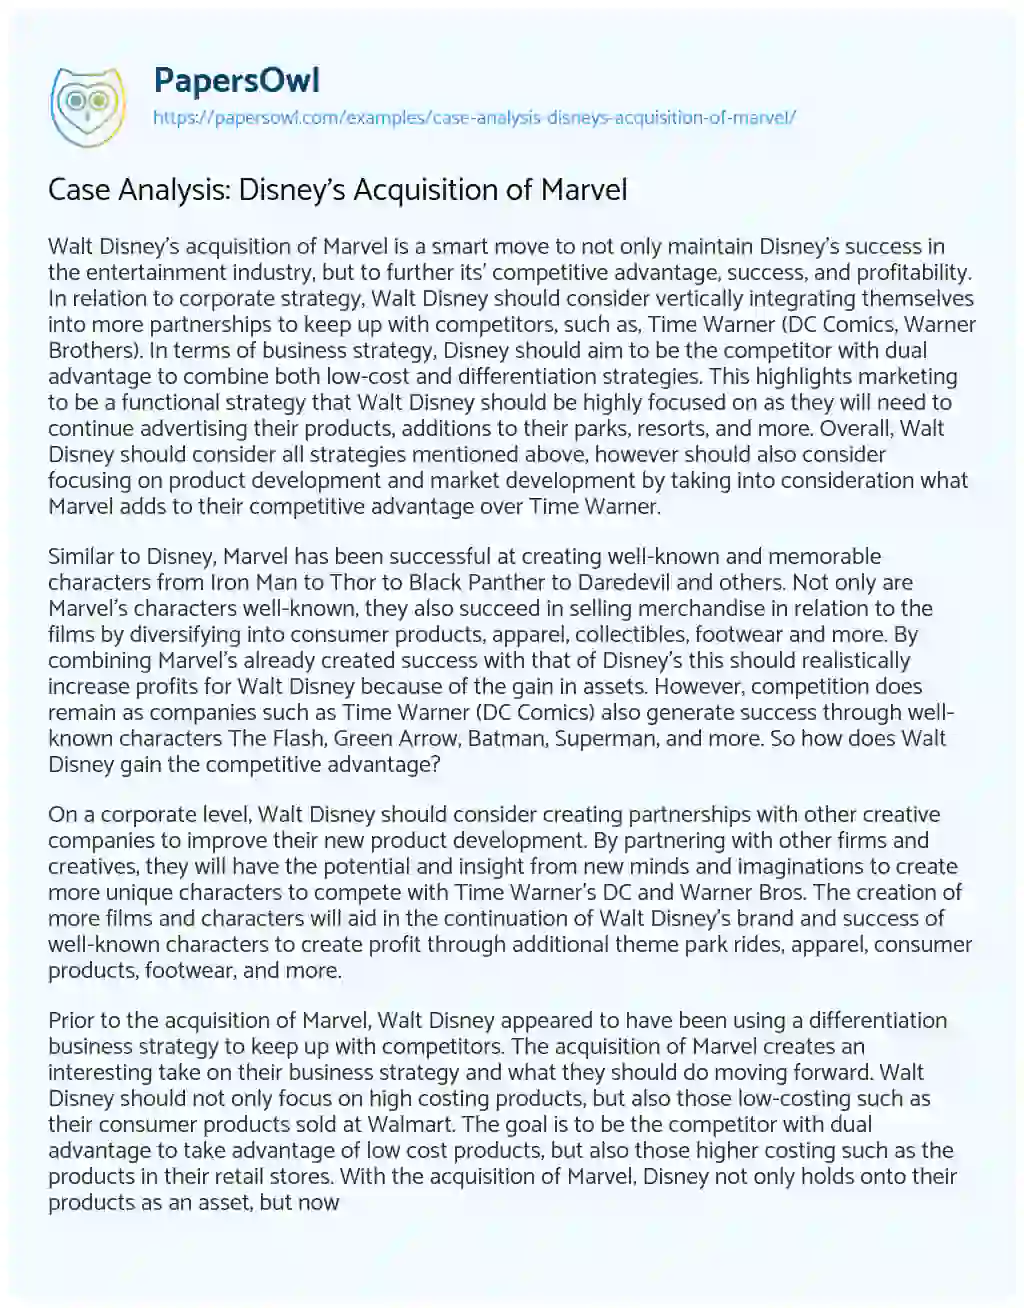 Essay on Case Analysis: Disney’s Acquisition of Marvel